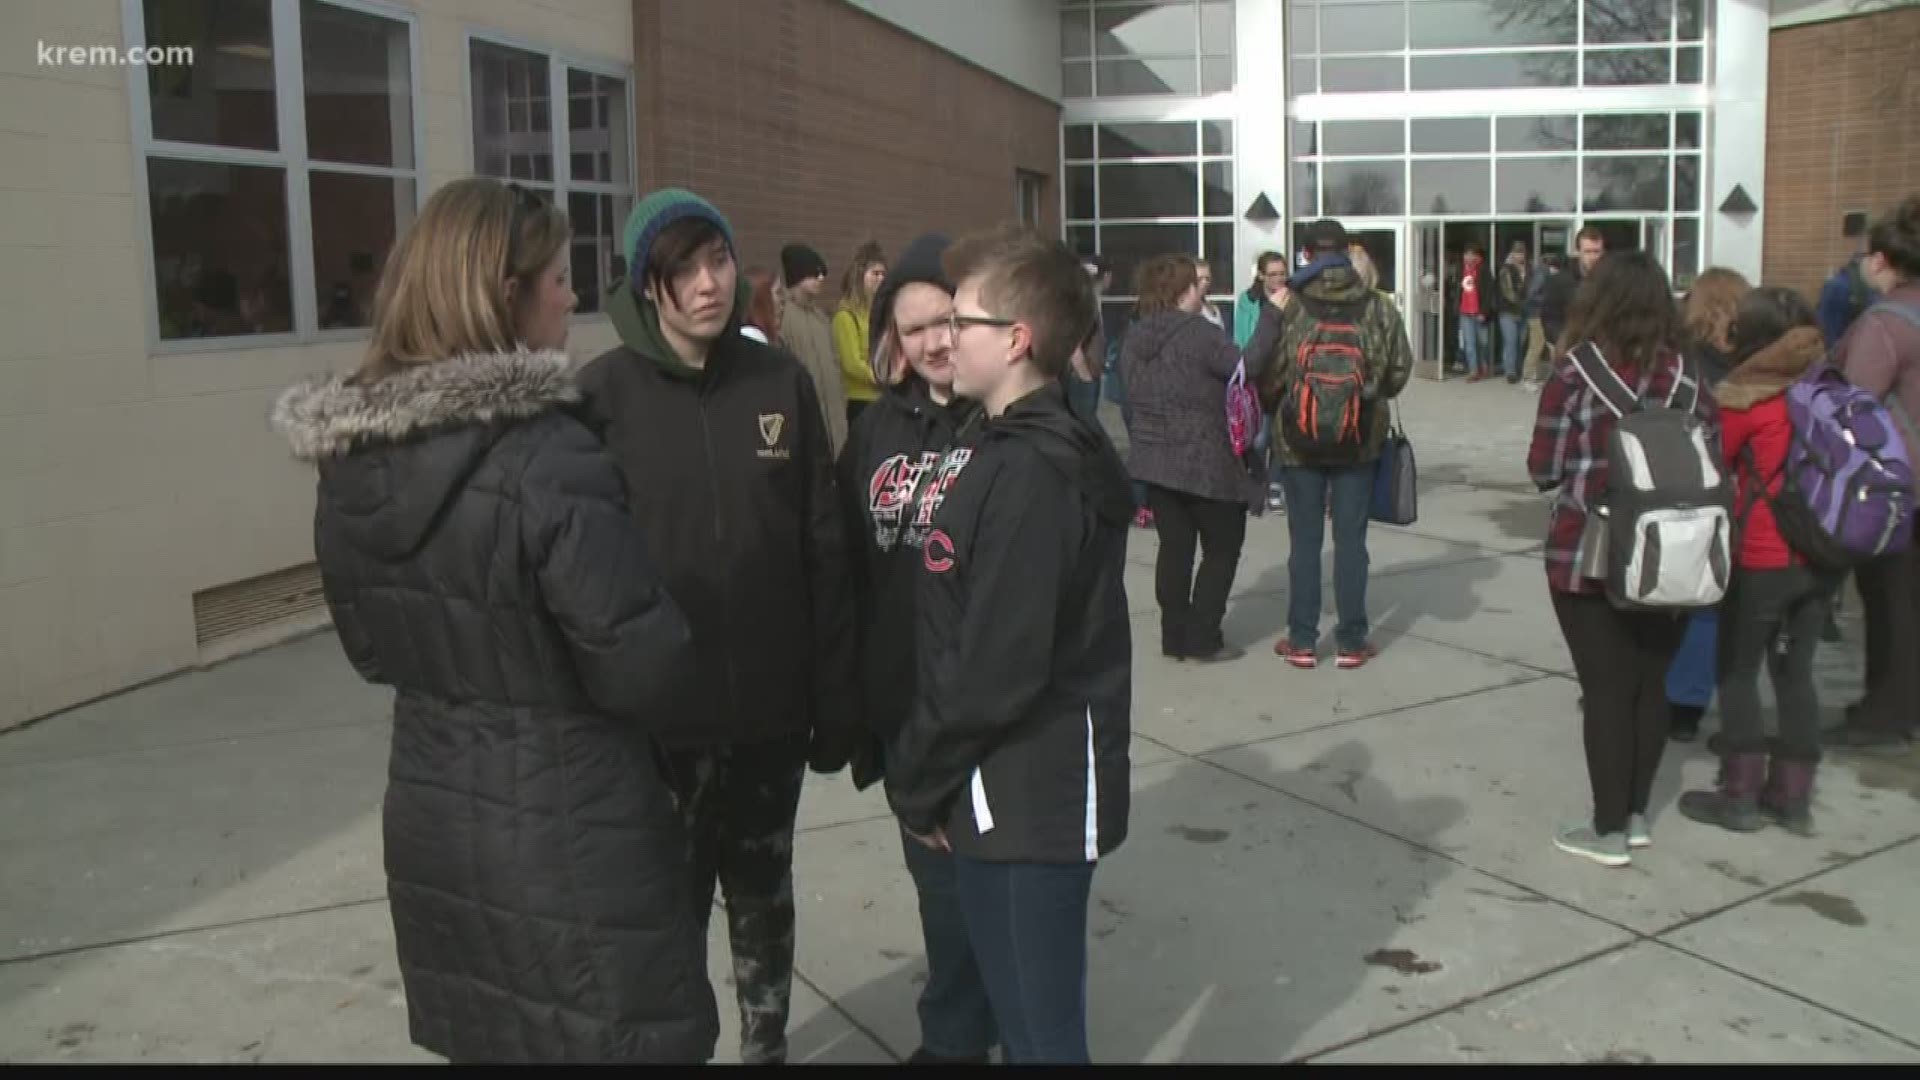 Spokane Public School leaders said they are still discussing how they will respond to this national call to action.